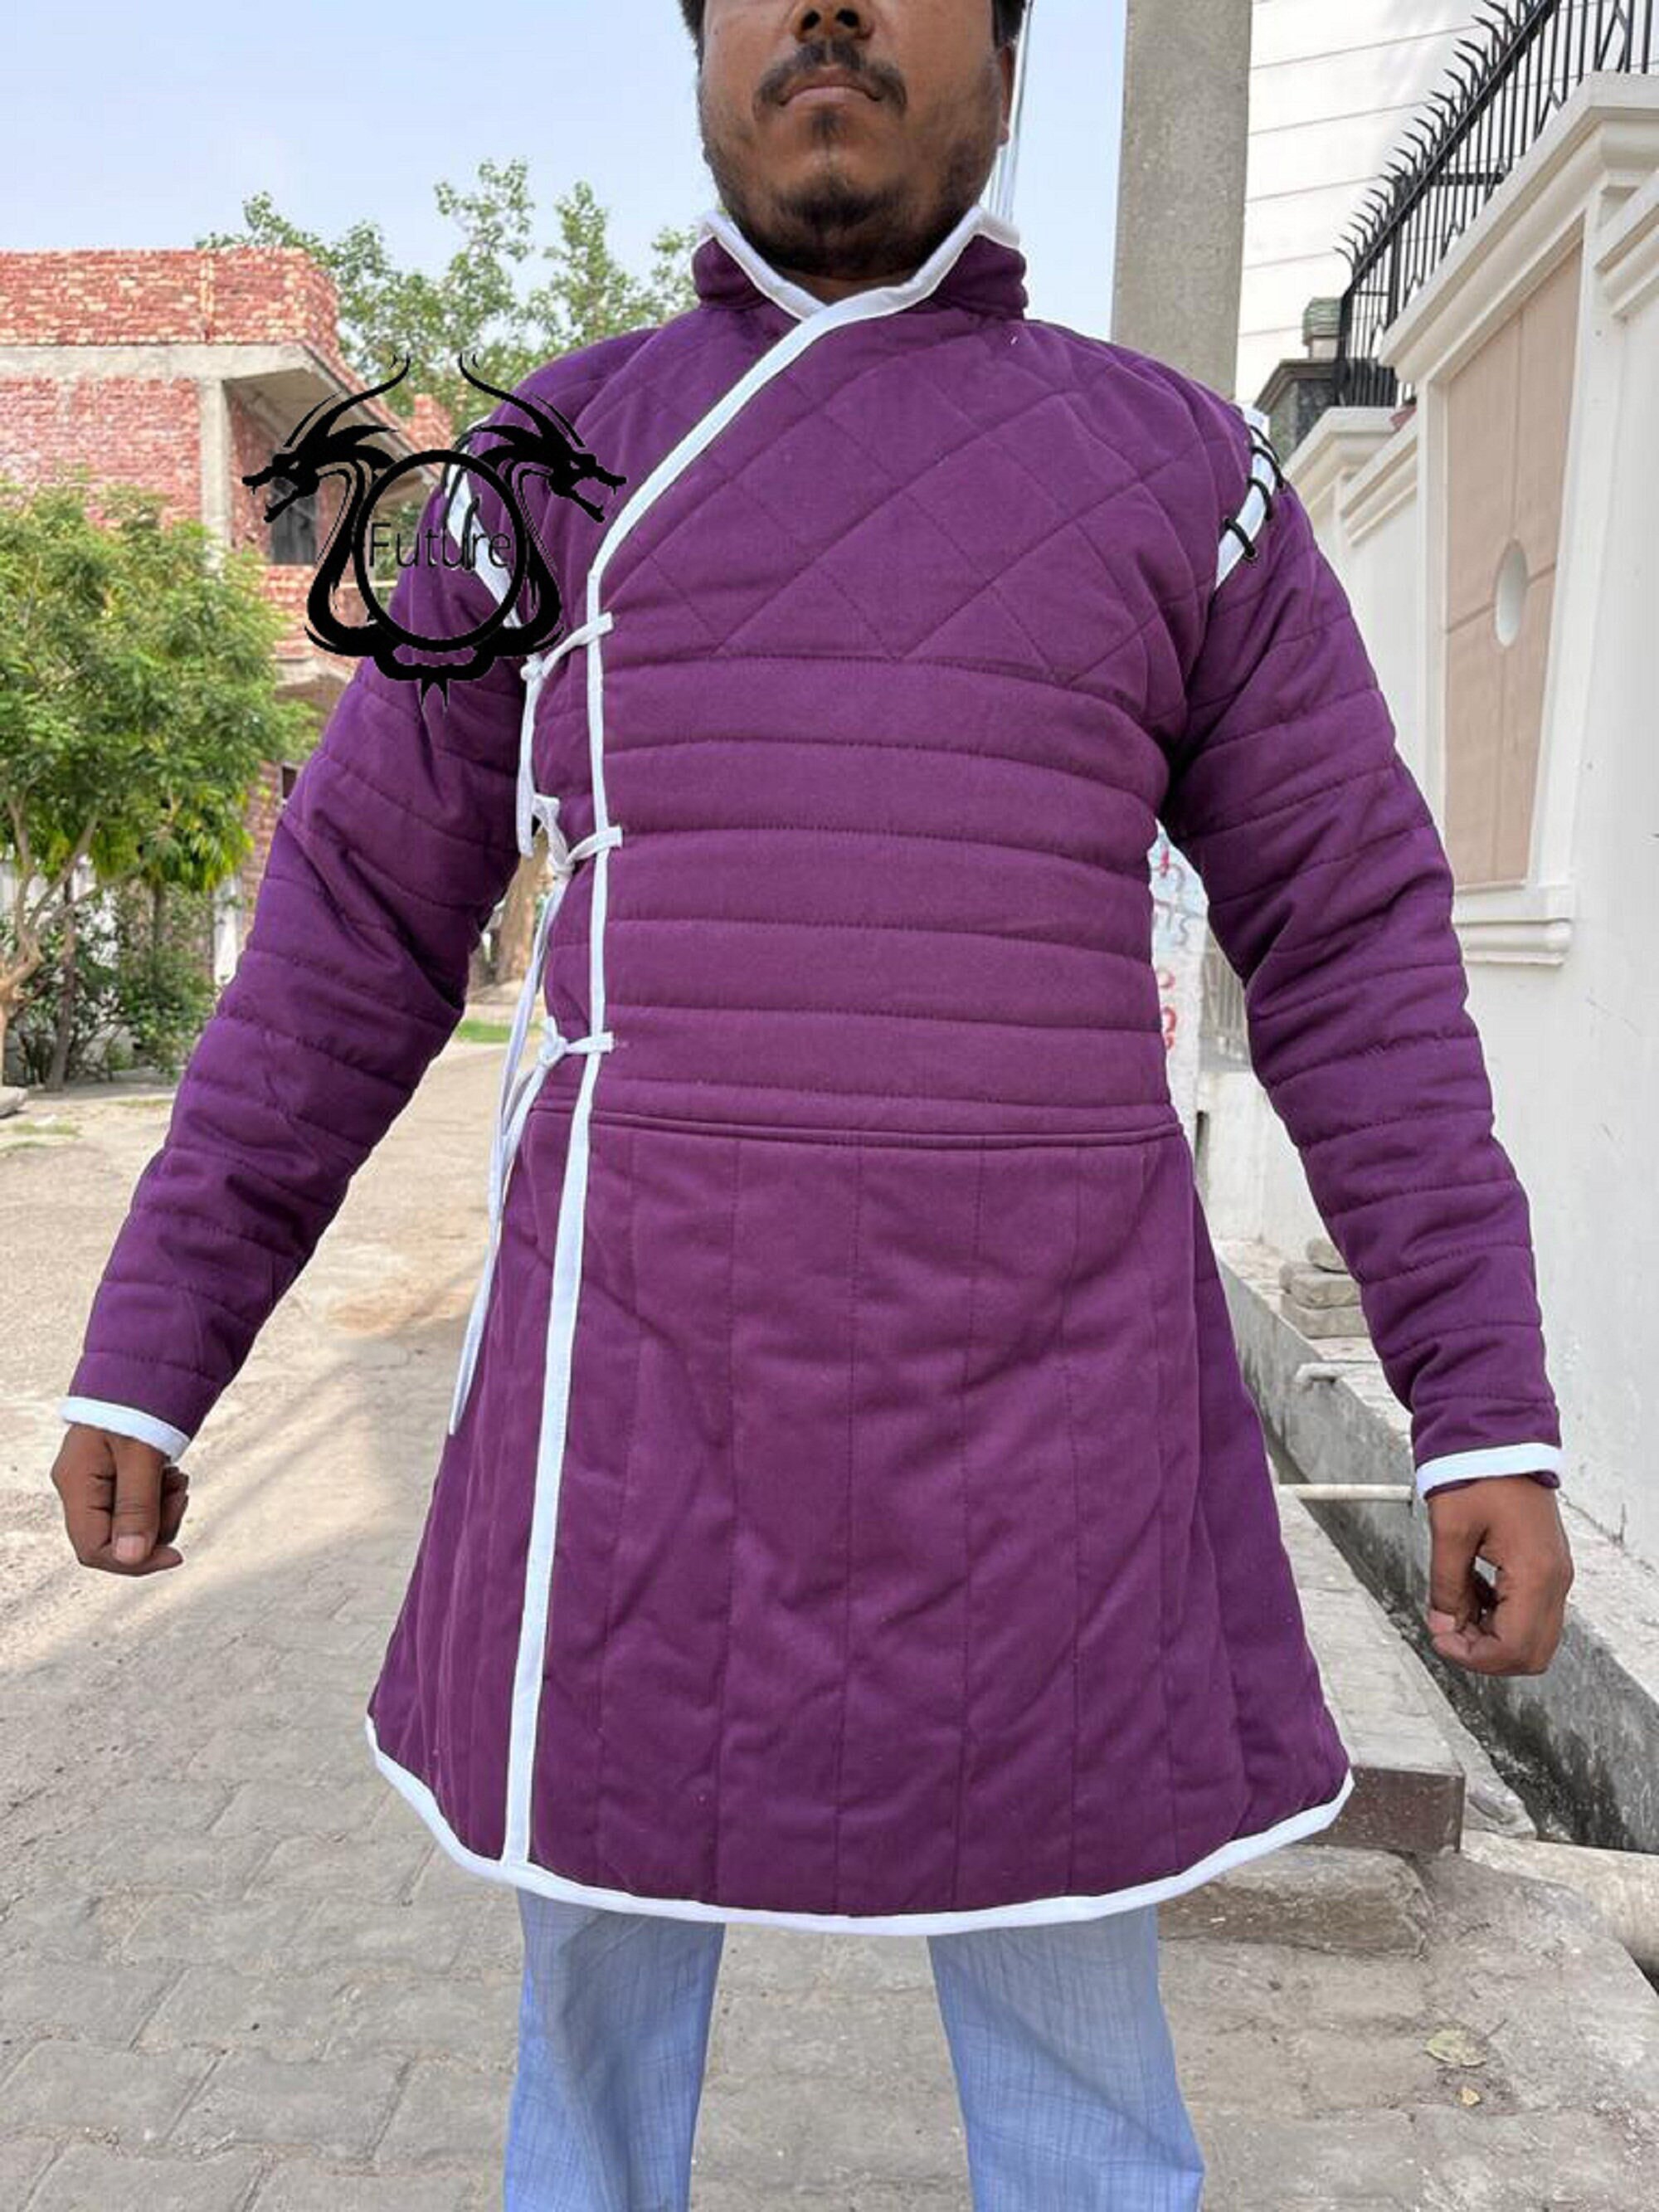 Cotton Fabric Medieval Thick Padded Half Length Full Sleeves Gambeson Coat Aketon Jacket Armor 